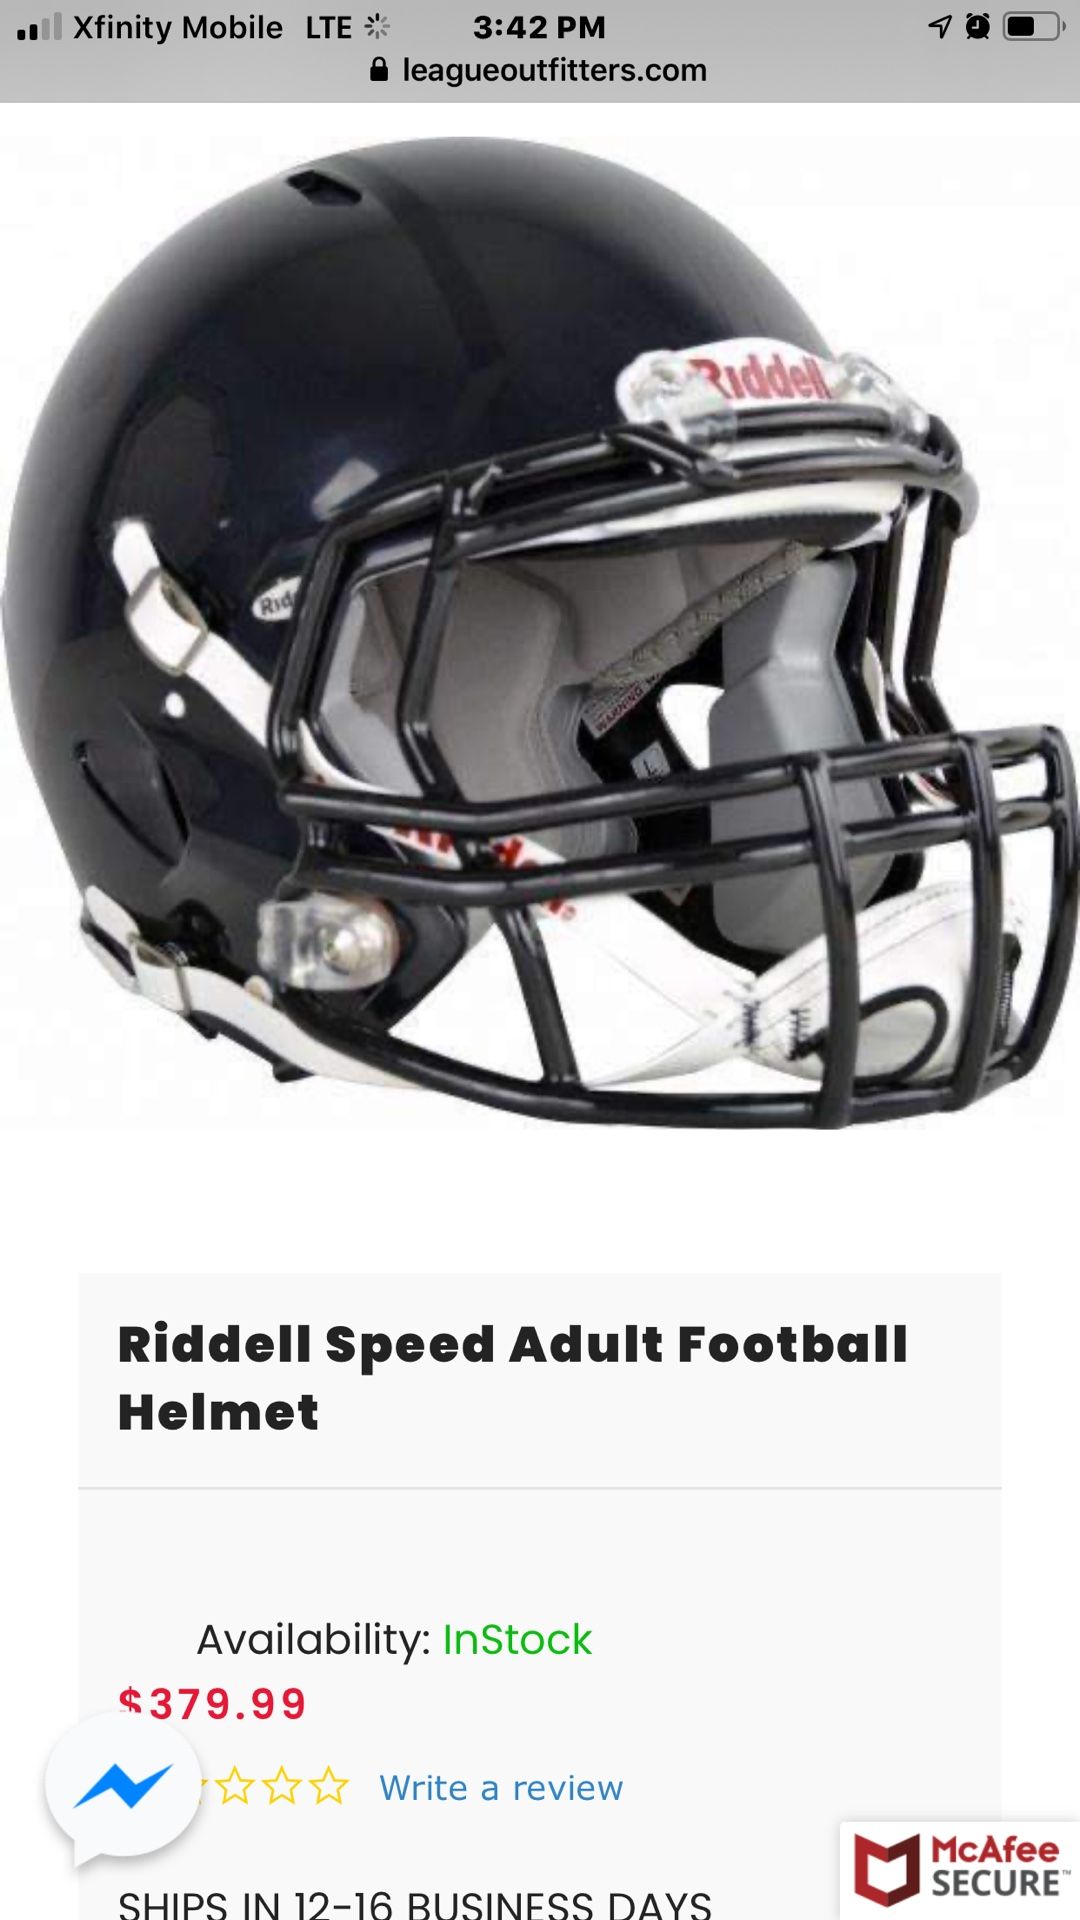 Riddle Helmet youth size mediums